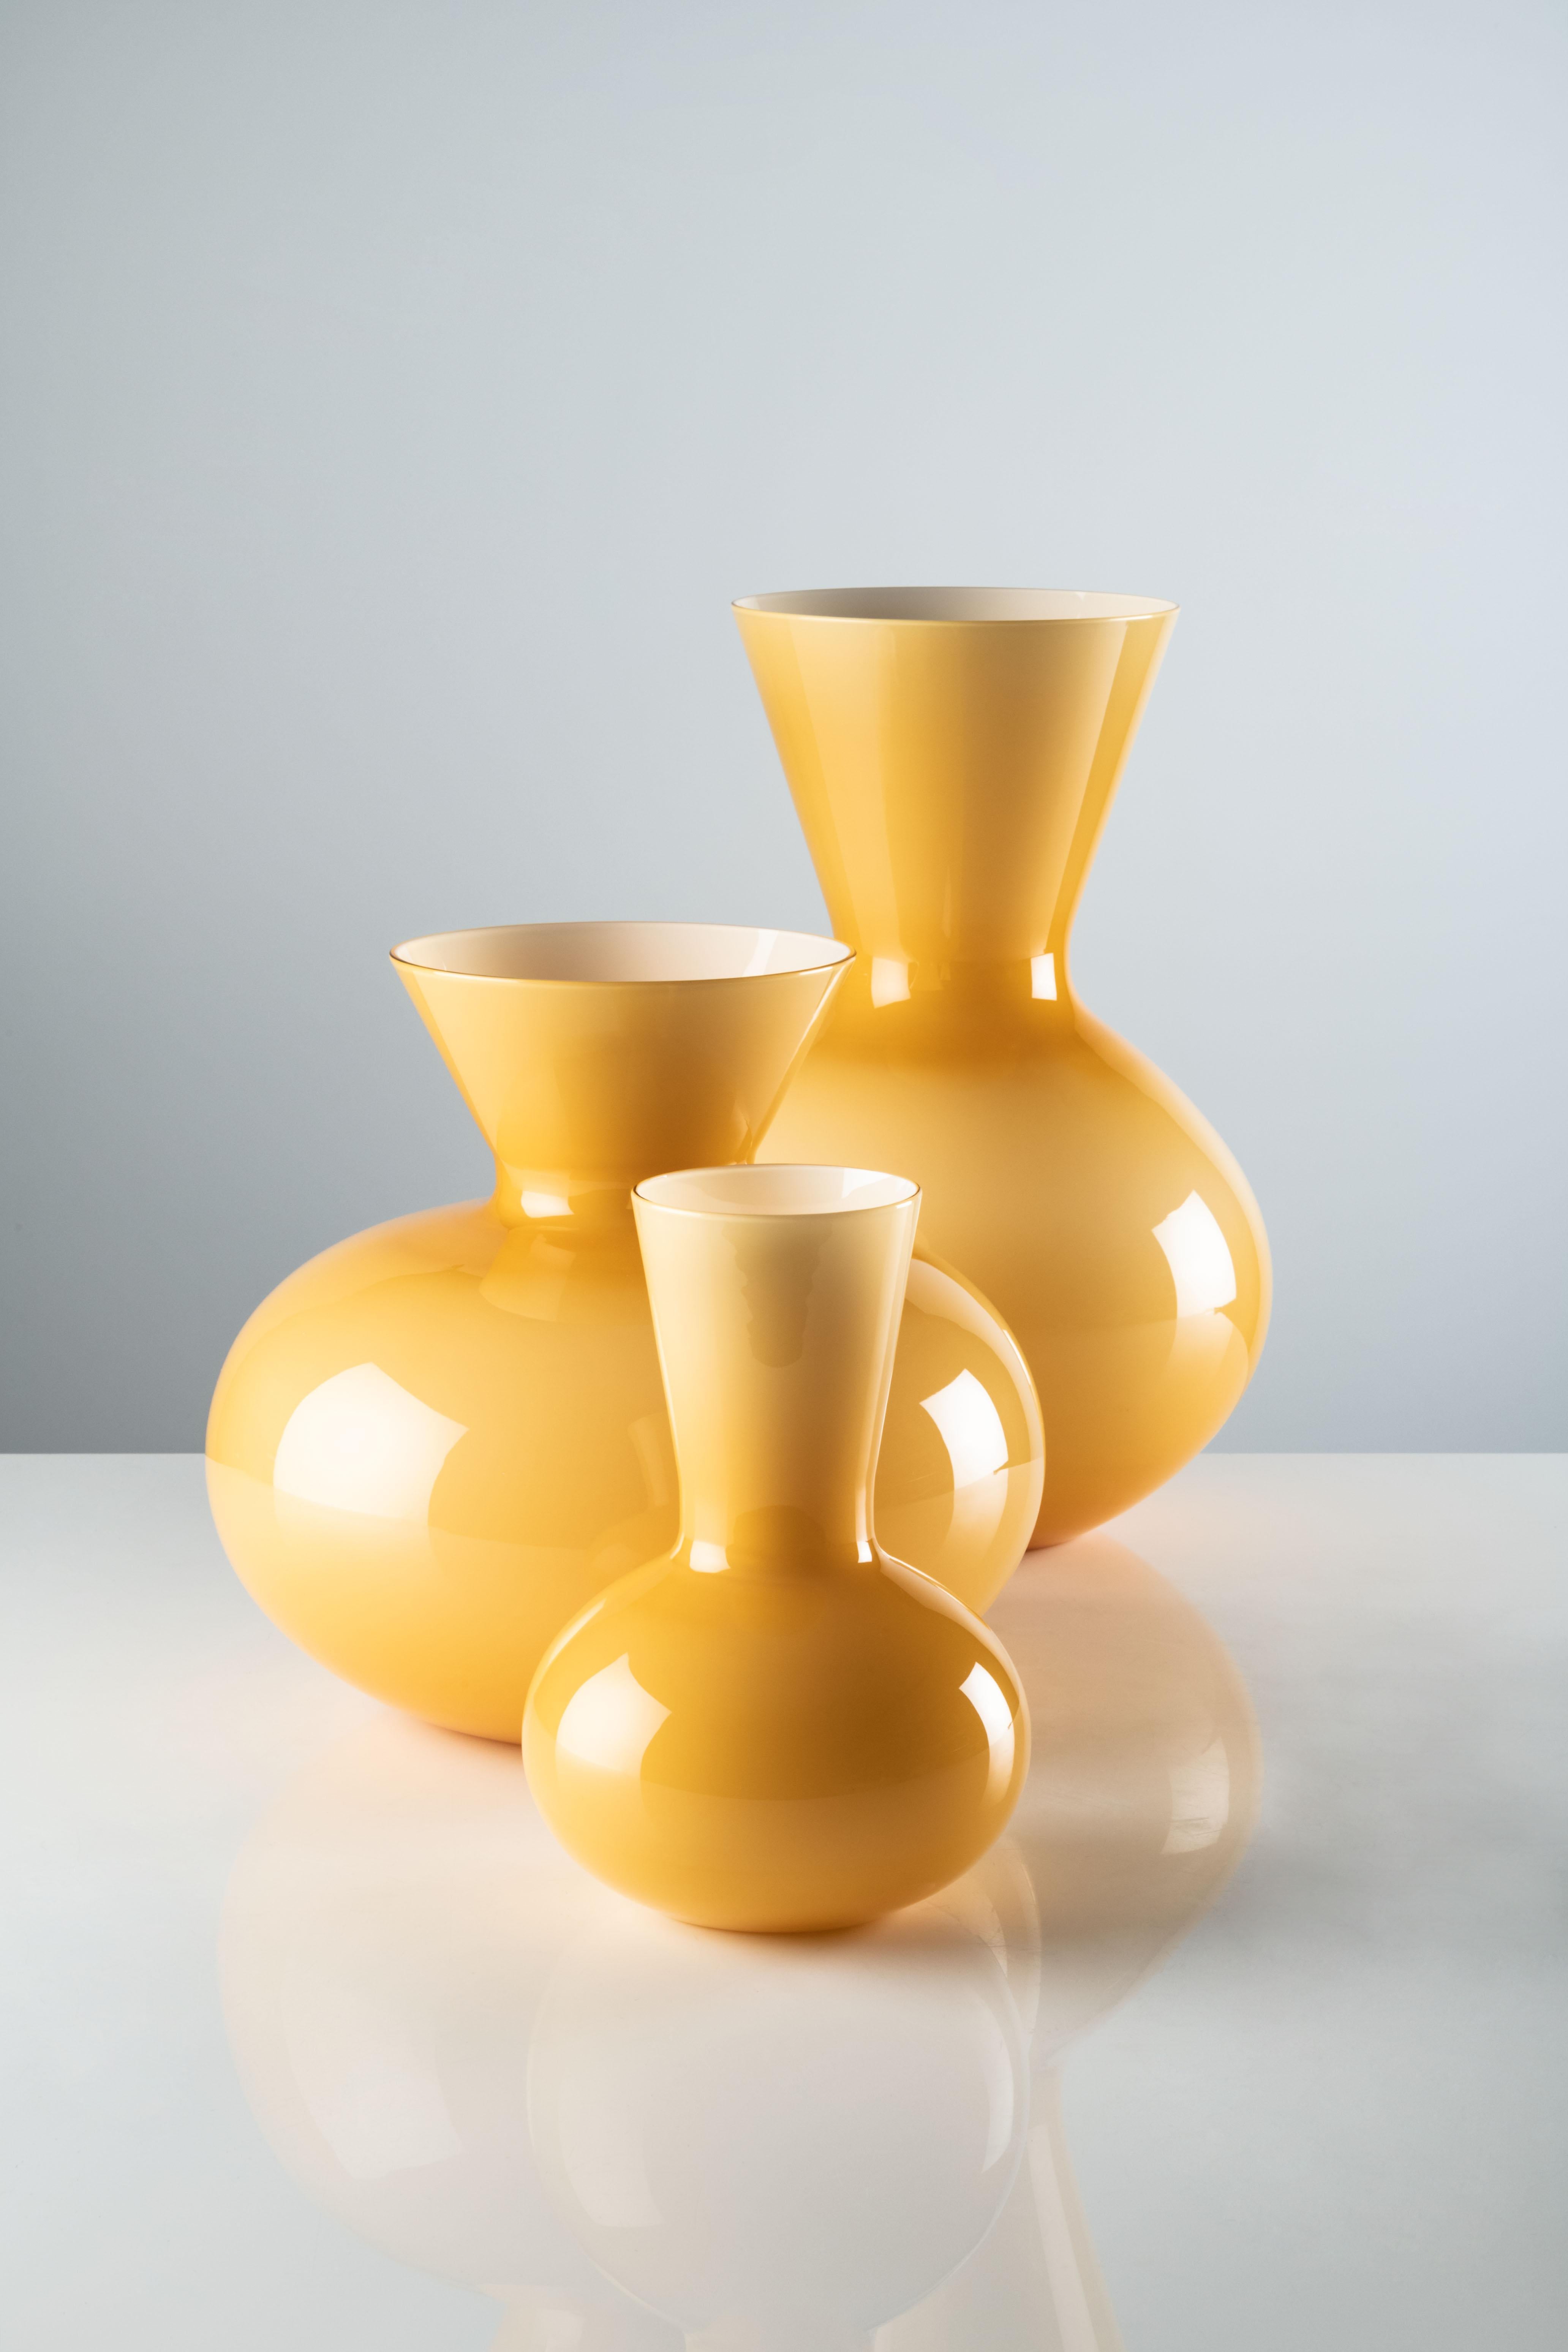 Idria large vase in Amber Murano glass by Venini. The Ancient Greek water vessel sheds its skin, as terracotta gives way to glass, thanks to Venini. Its design speaks of bygone days and rhythms, bringing them back to life: timeless beauty that